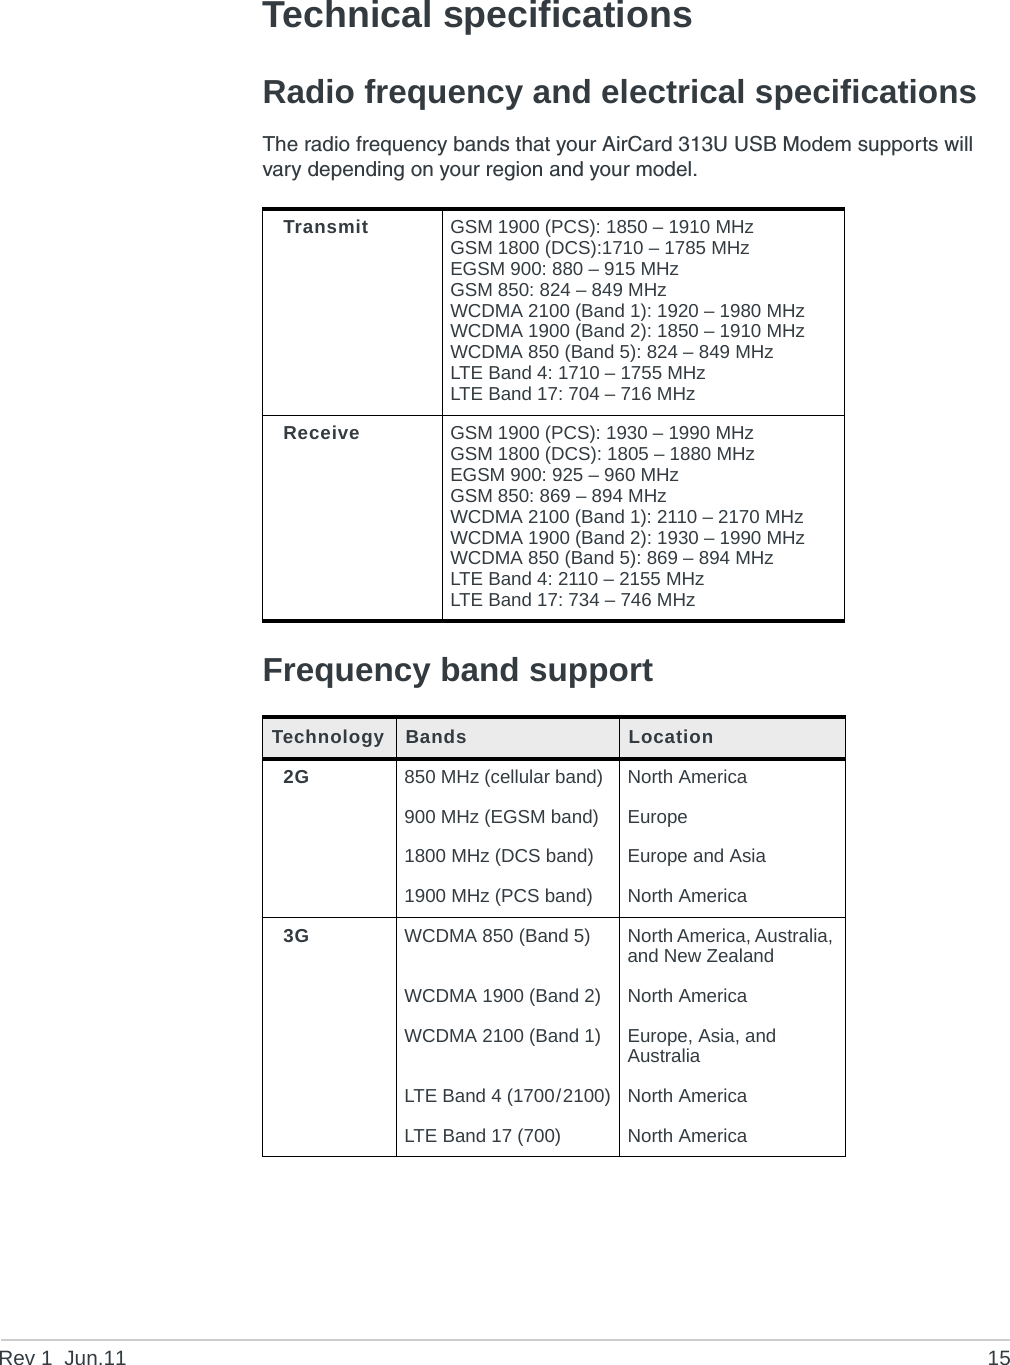 Rev 1  Jun.11 15Technical specificationsRadio frequency and electrical specificationsThe radio frequency bands that your AirCard 313U USB Modem supports will vary depending on your region and your model.Frequency band supportTransmit GSM 1900 (PCS): 1850 – 1910 MHzGSM 1800 (DCS):1710 – 1785 MHzEGSM 900: 880 – 915 MHzGSM 850: 824 – 849 MHzWCDMA 2100 (Band 1): 1920 – 1980 MHzWCDMA 1900 (Band 2): 1850 – 1910 MHzWCDMA 850 (Band 5): 824 – 849 MHzLTE Band 4: 1710 – 1755 MHzLTE Band 17: 704 – 716 MHzReceive GSM 1900 (PCS): 1930 – 1990 MHzGSM 1800 (DCS): 1805 – 1880 MHzEGSM 900: 925 – 960 MHzGSM 850: 869 – 894 MHzWCDMA 2100 (Band 1): 2110 – 2170 MHzWCDMA 1900 (Band 2): 1930 – 1990 MHzWCDMA 850 (Band 5): 869 – 894 MHzLTE Band 4: 2110 – 2155 MHzLTE Band 17: 734 – 746 MHzTechnology Bands Location2G 850 MHz (cellular band) North America900 MHz (EGSM band) Europe1800 MHz (DCS band) Europe and Asia1900 MHz (PCS band) North America3G WCDMA 850 (Band 5) North America, Australia, and New ZealandWCDMA 1900 (Band 2) North AmericaWCDMA 2100 (Band 1) Europe, Asia, and AustraliaLTE Band 4 (1700/2100) North AmericaLTE Band 17 (700) North America